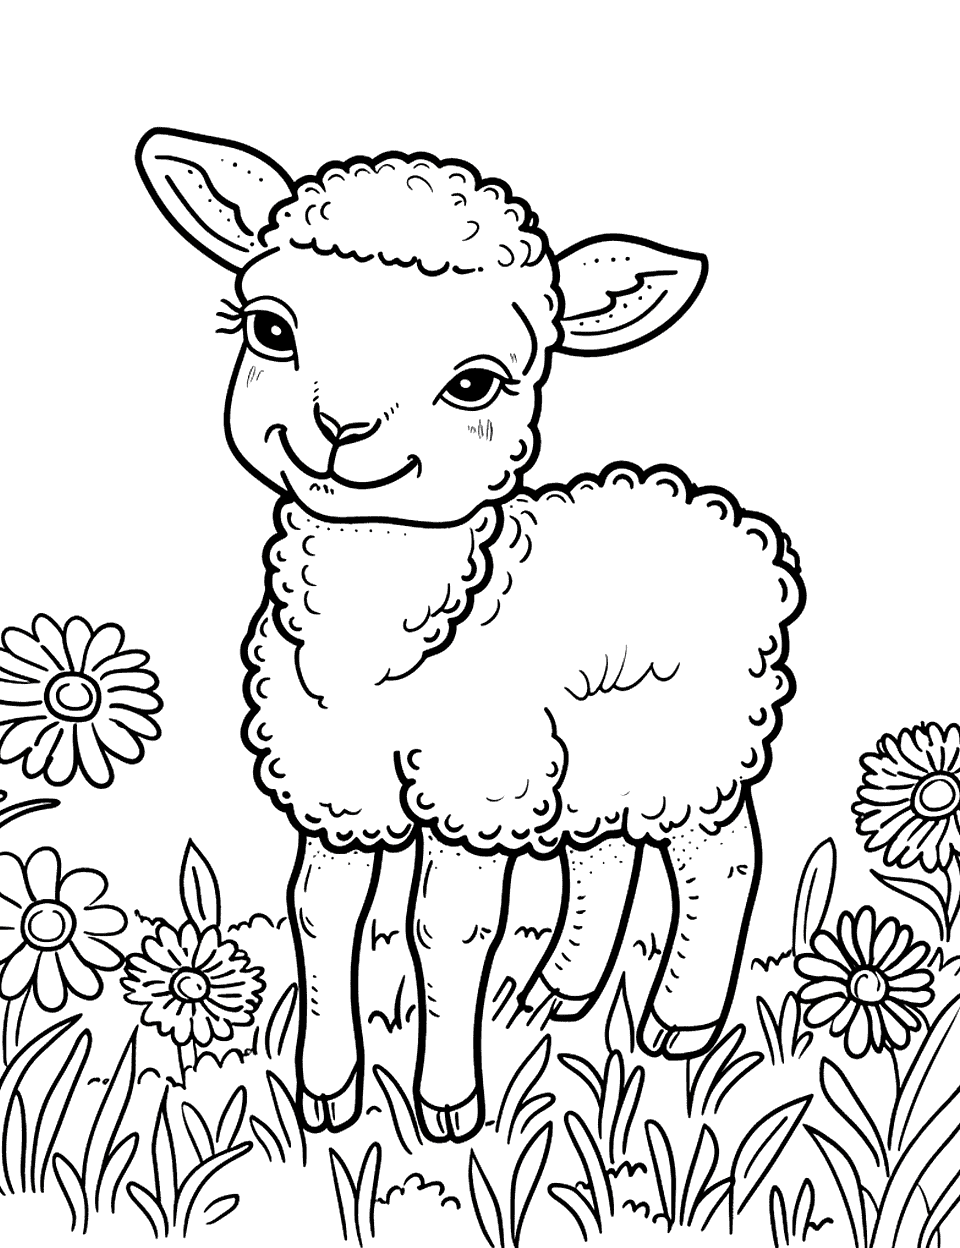 Baby Sheep Playing Coloring Page - A playful lamb frolicking around in a meadow filled with wildflowers.